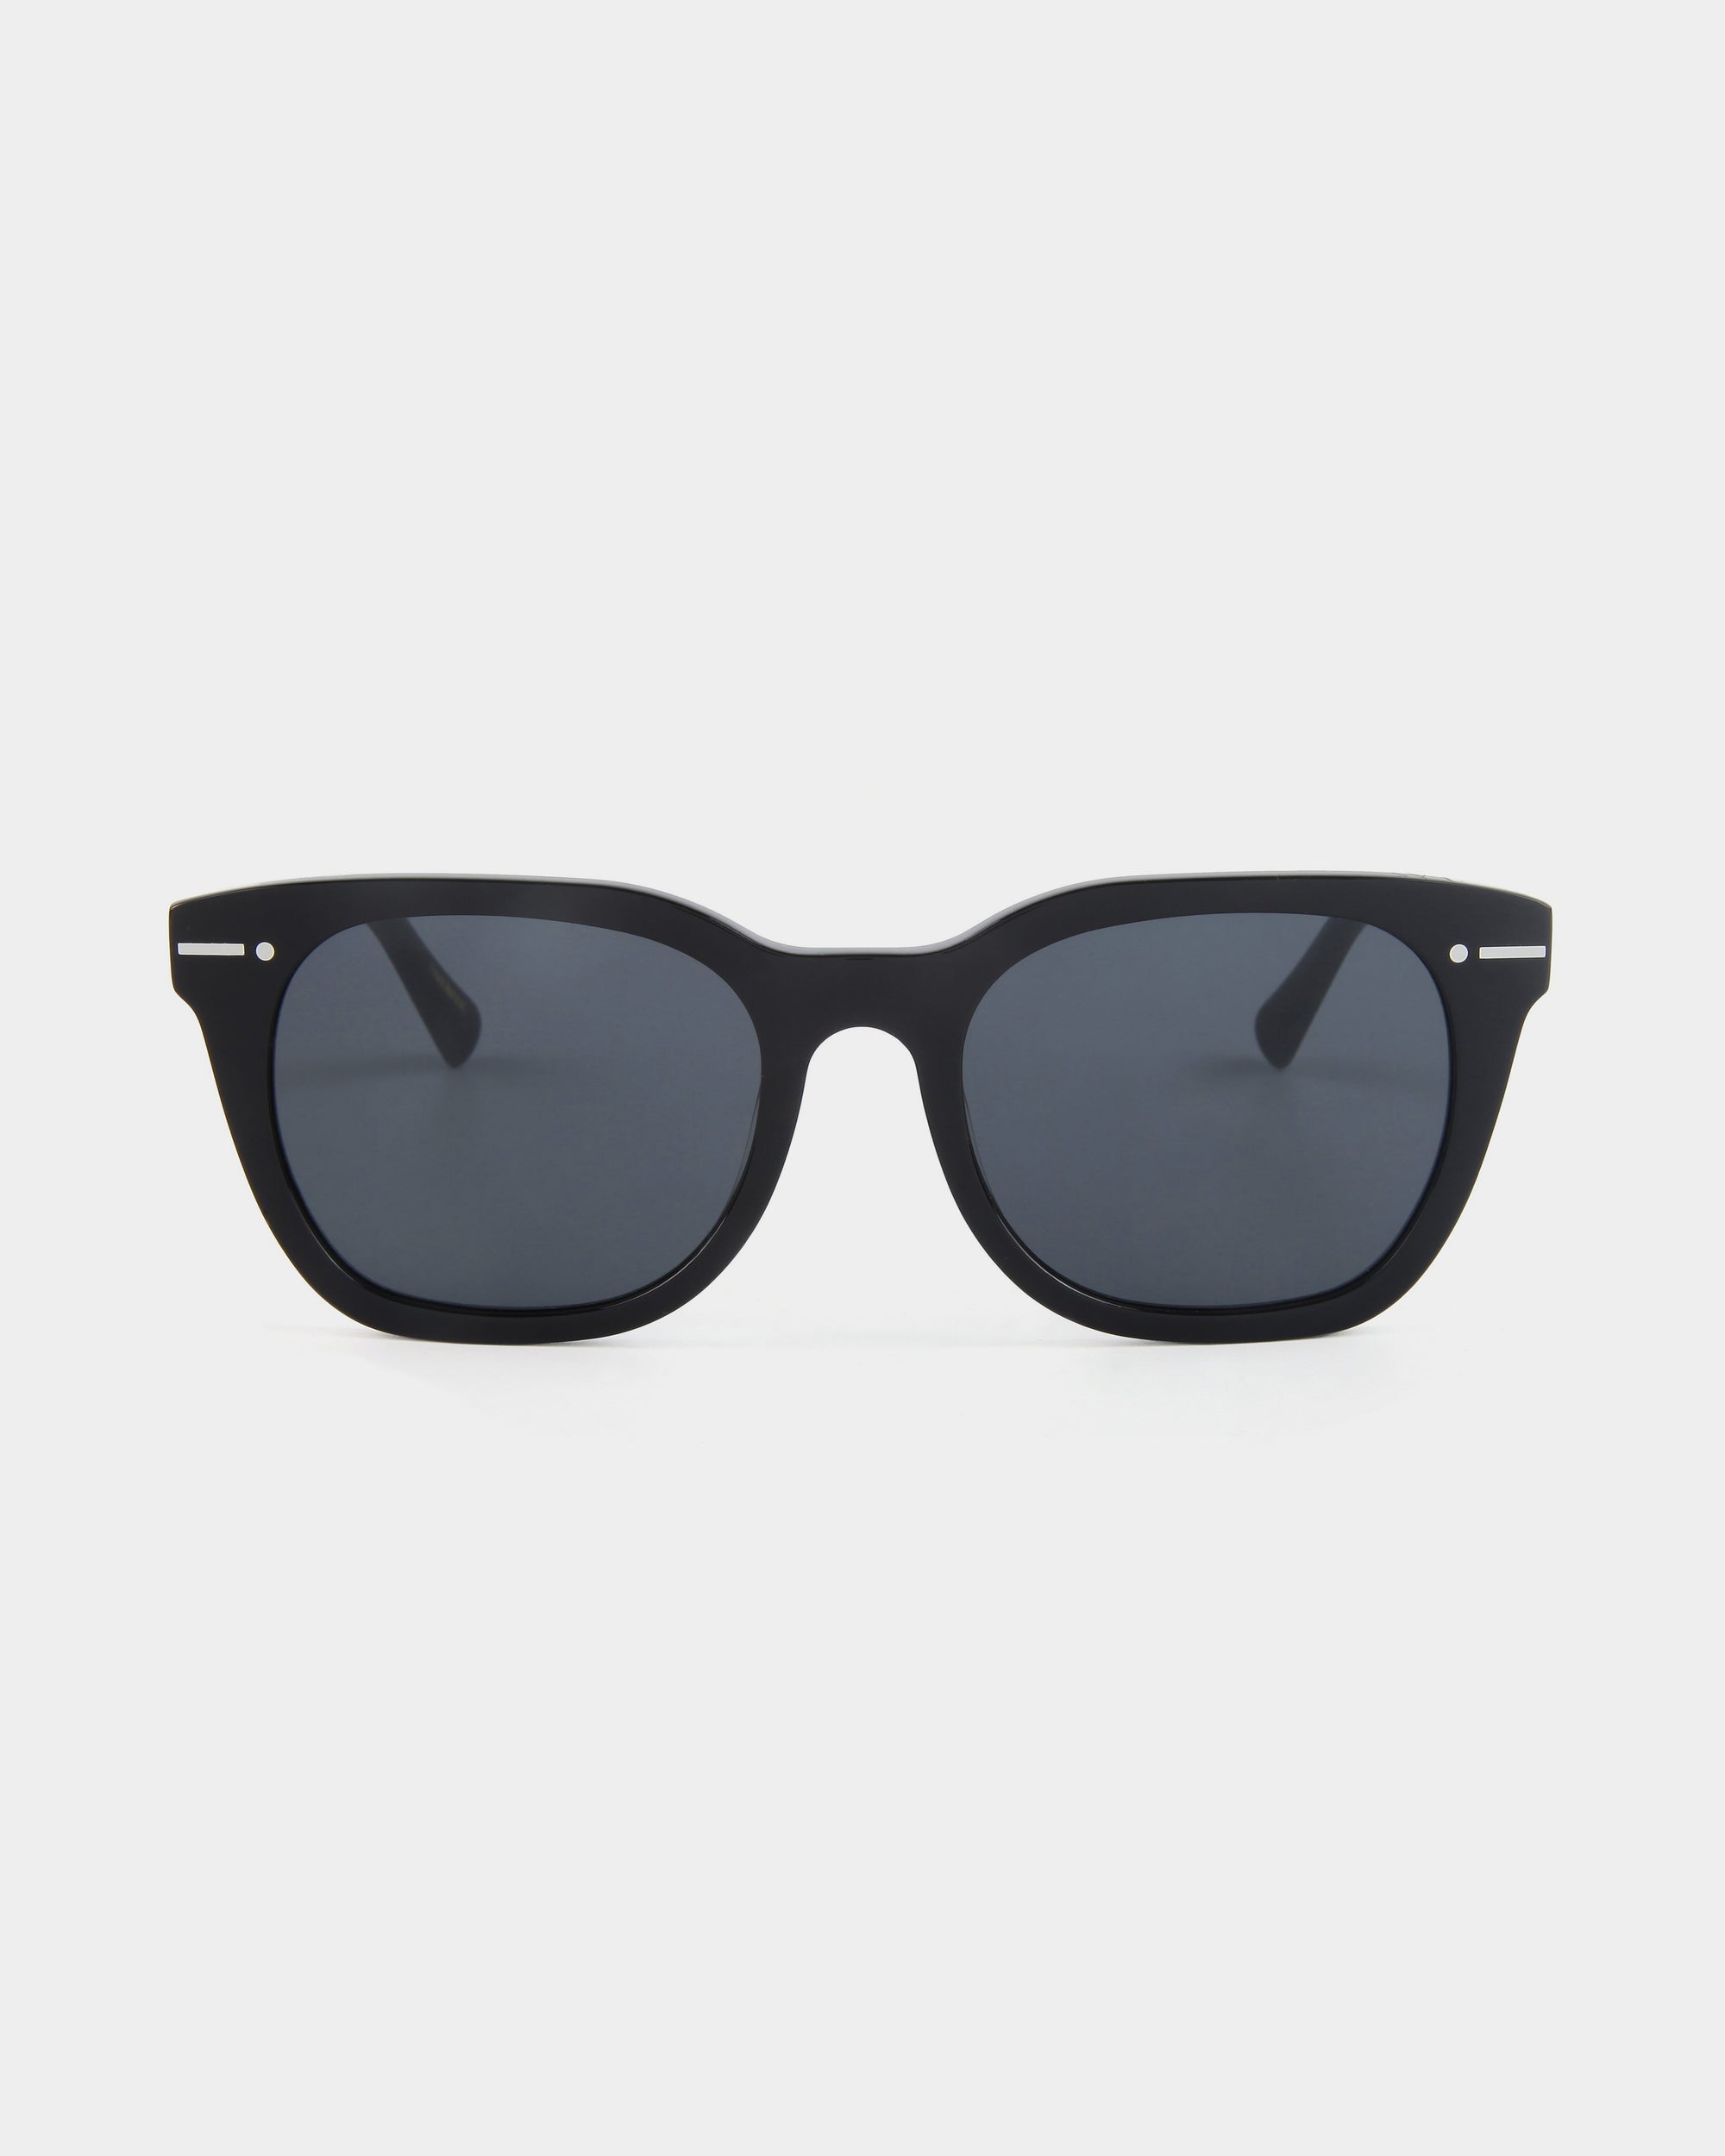 A pair of black rectangular For Art&#39;s Sake® Jacuzzi sunglasses with dark tinted Nylon lenses is displayed against a plain white background. The frame, made of Mazzucchelli acetate, is matte black with subtle silver accents near the hinges. These sunglasses offer classic minimalist style and complete UVA &amp; UVB protection.